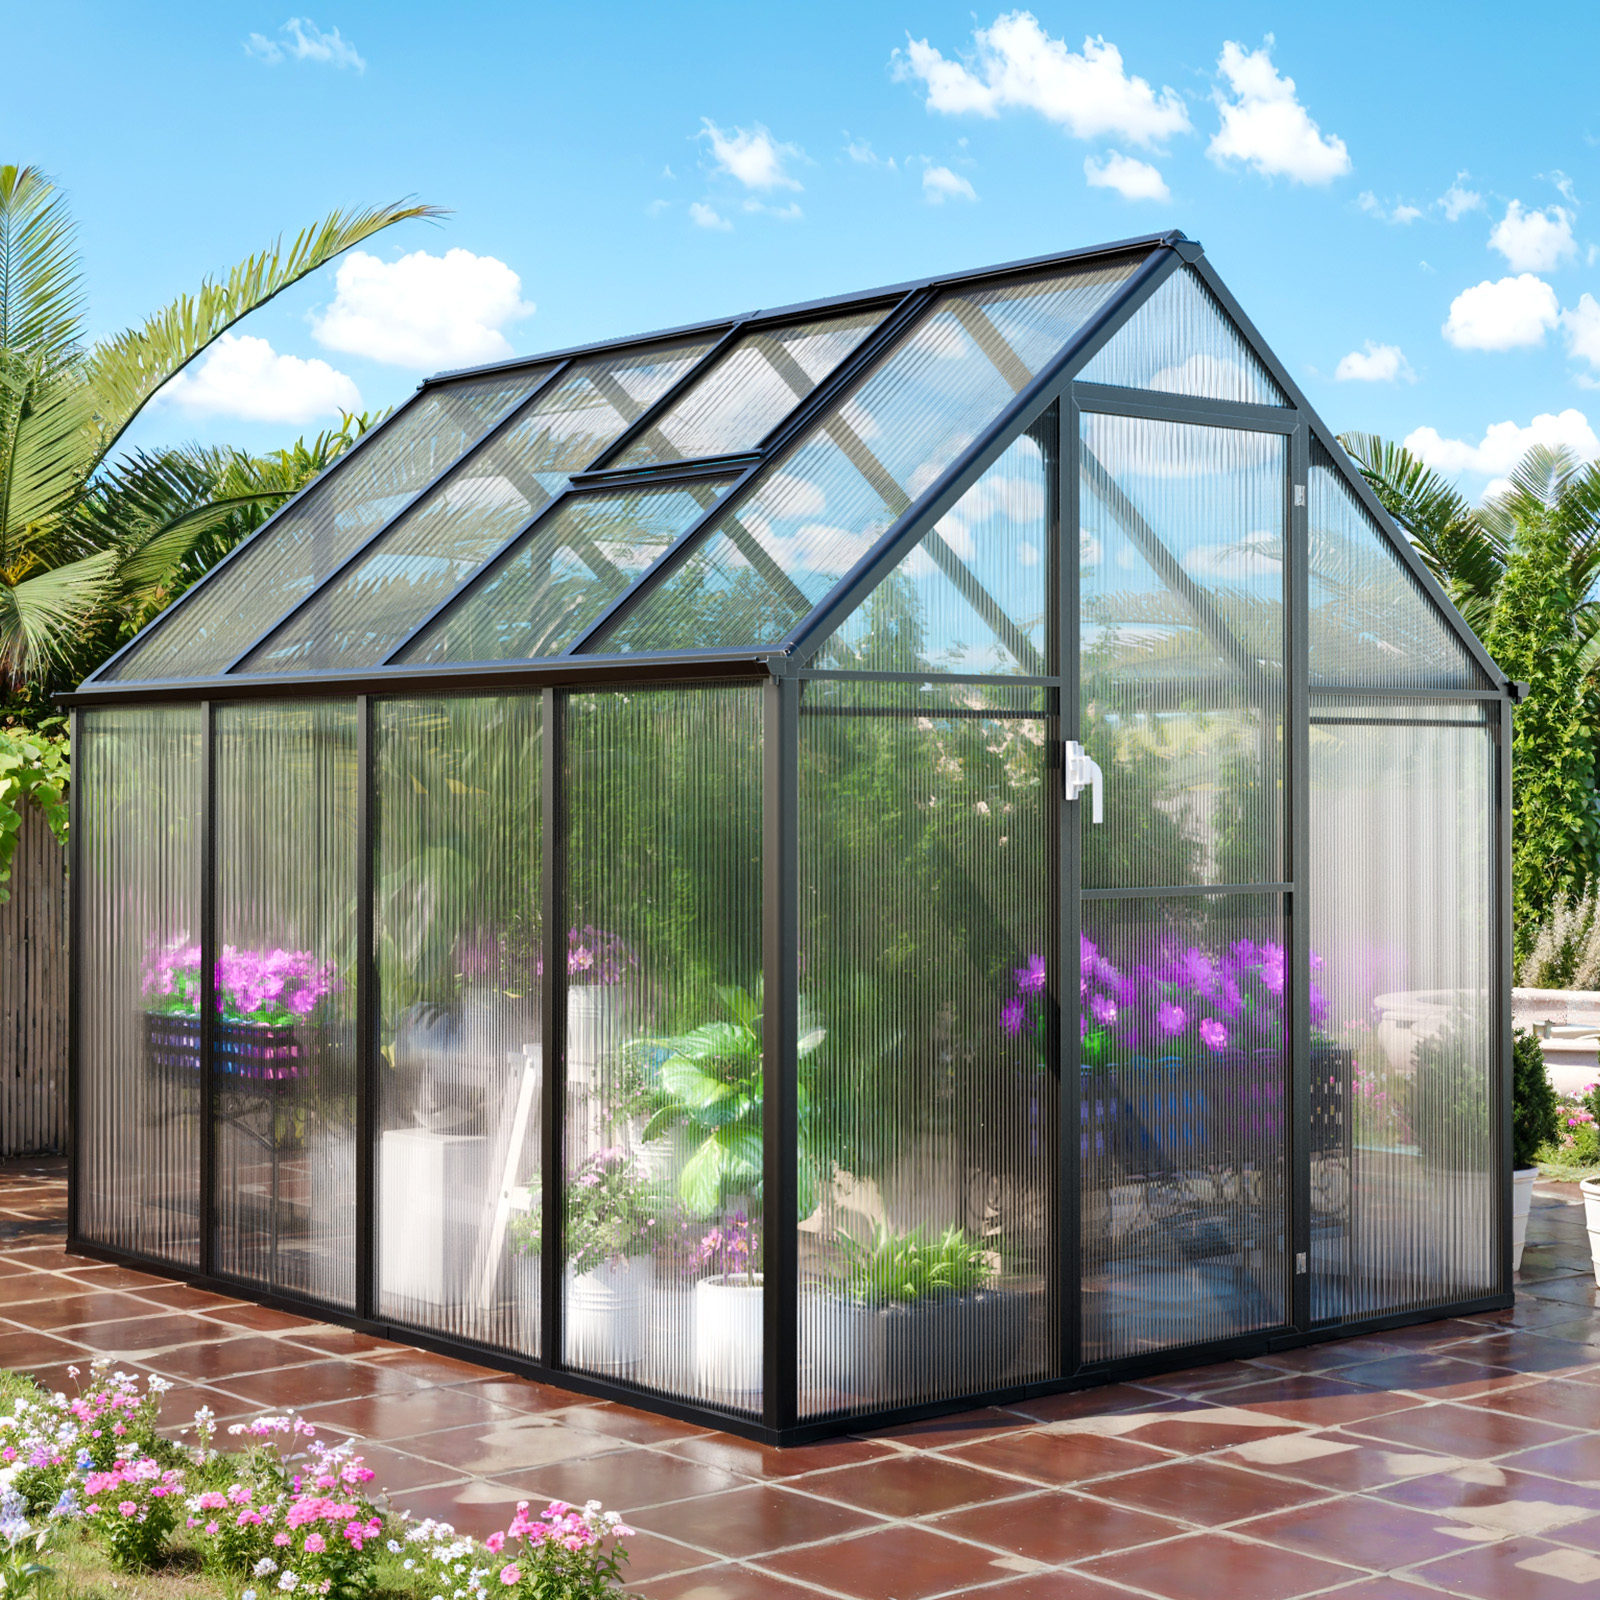 July’s Song 6’x8’ Greenhouse for Outdoors,Upgraded Polycarbonate Greenhouse Aluminum Walk in Greenhouses w/Vent Window, Lockable Door & Reinforce Connector Heavy Duty Green House for Outdoor, Patio, - image 1 of 10